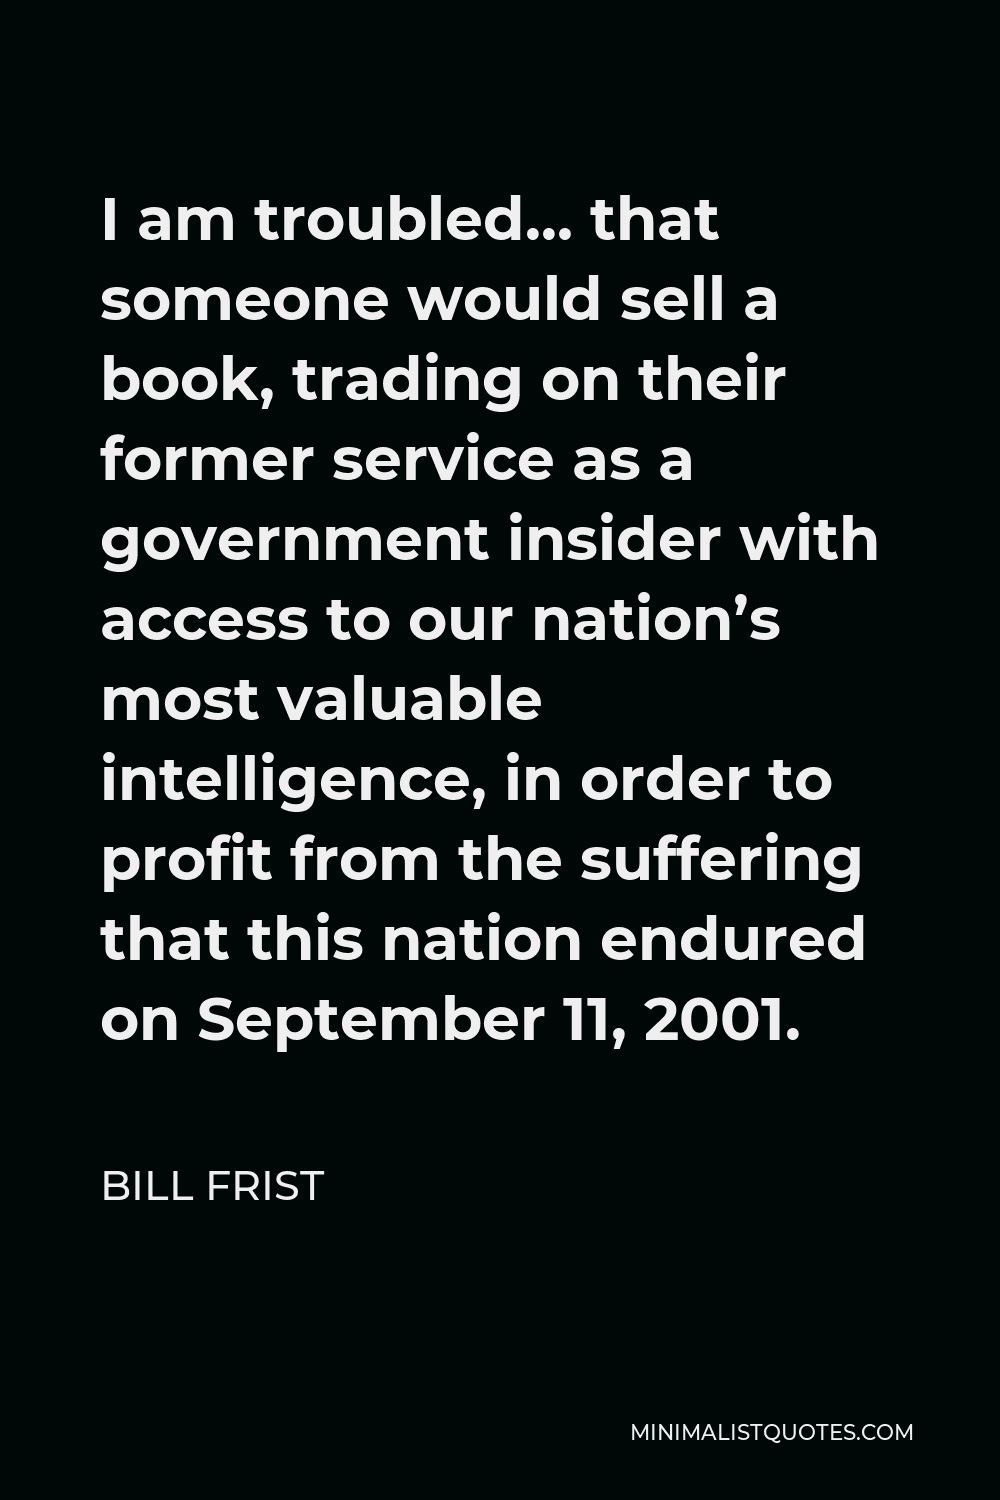 Bill Frist Quote - I am troubled… that someone would sell a book, trading on their former service as a government insider with access to our nation’s most valuable intelligence, in order to profit from the suffering that this nation endured on September 11, 2001.